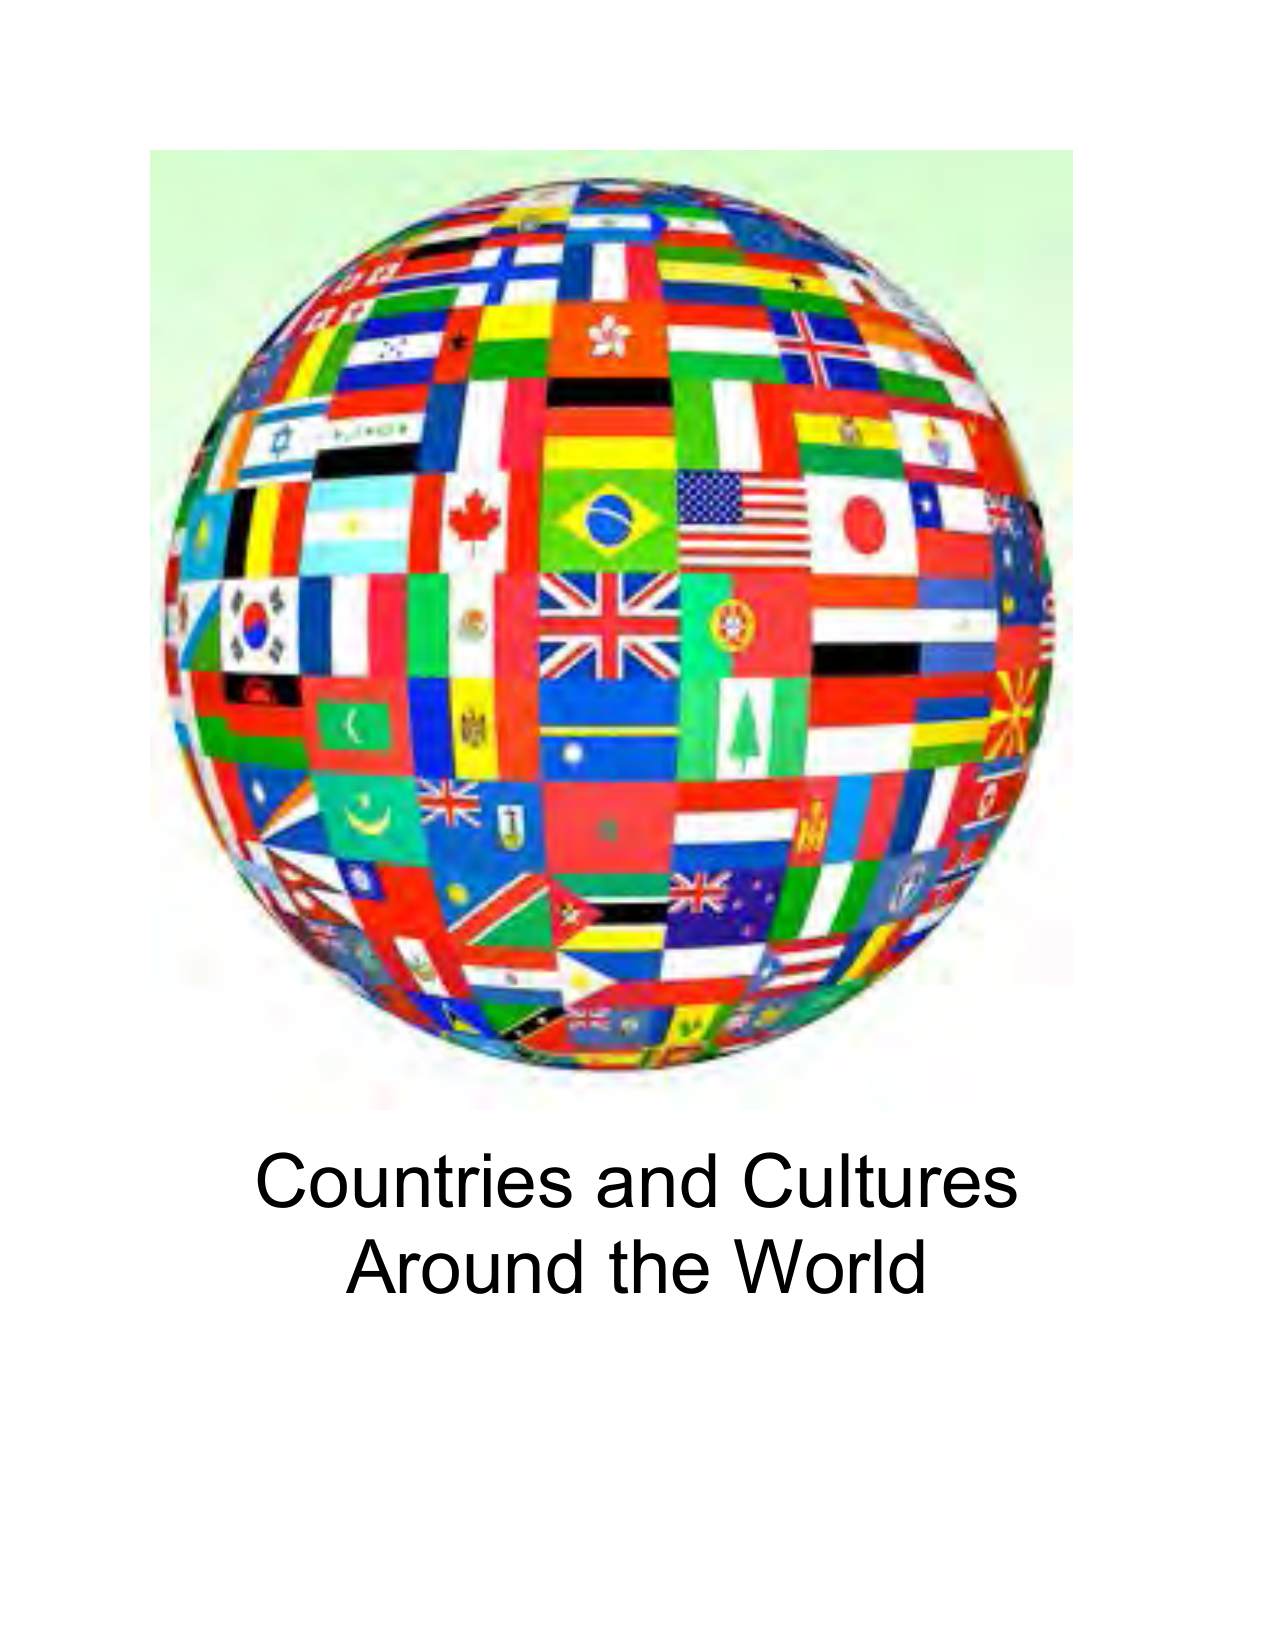 Different Cultures around the World book.